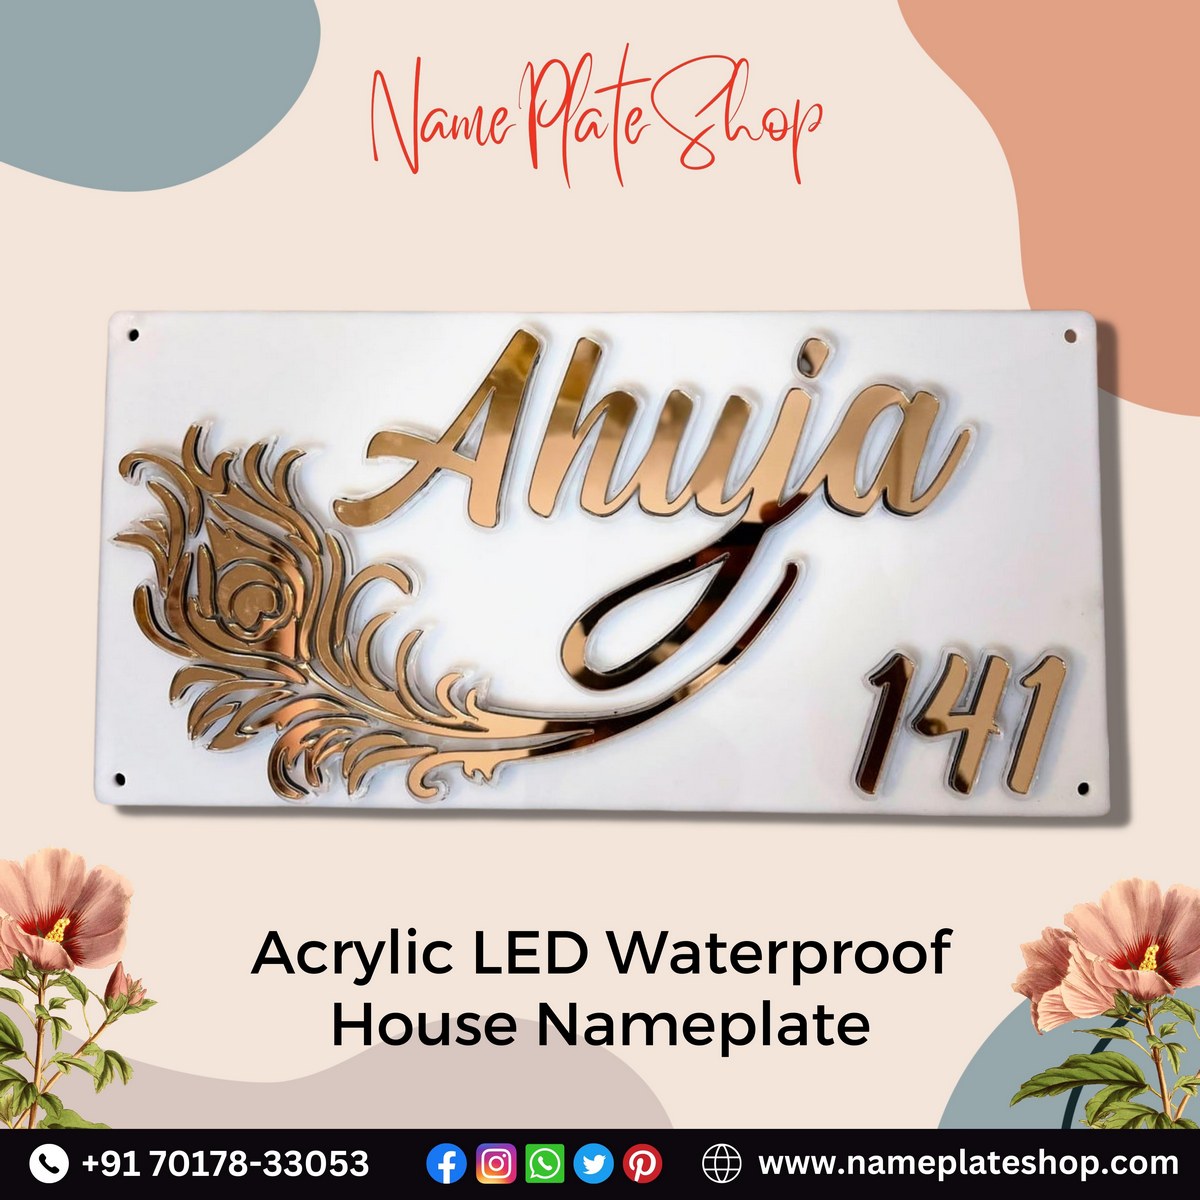 Acrylic LED Waterproof House Nameplate Beauty And Beyond